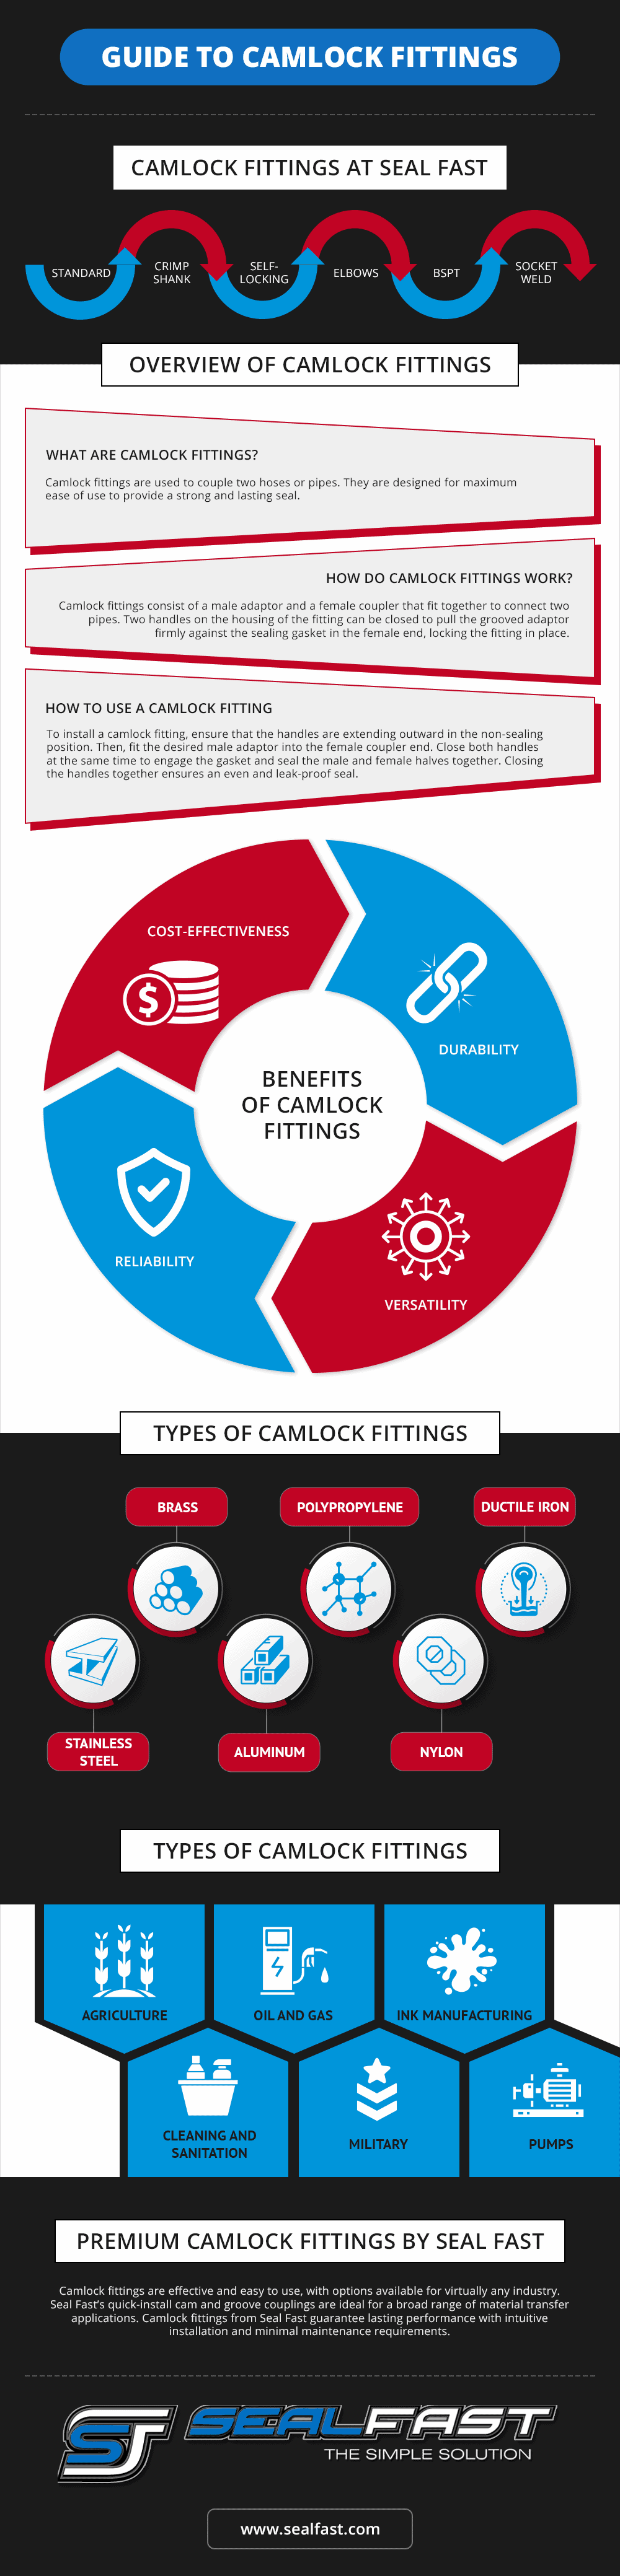 Guide to Camlock Fittings